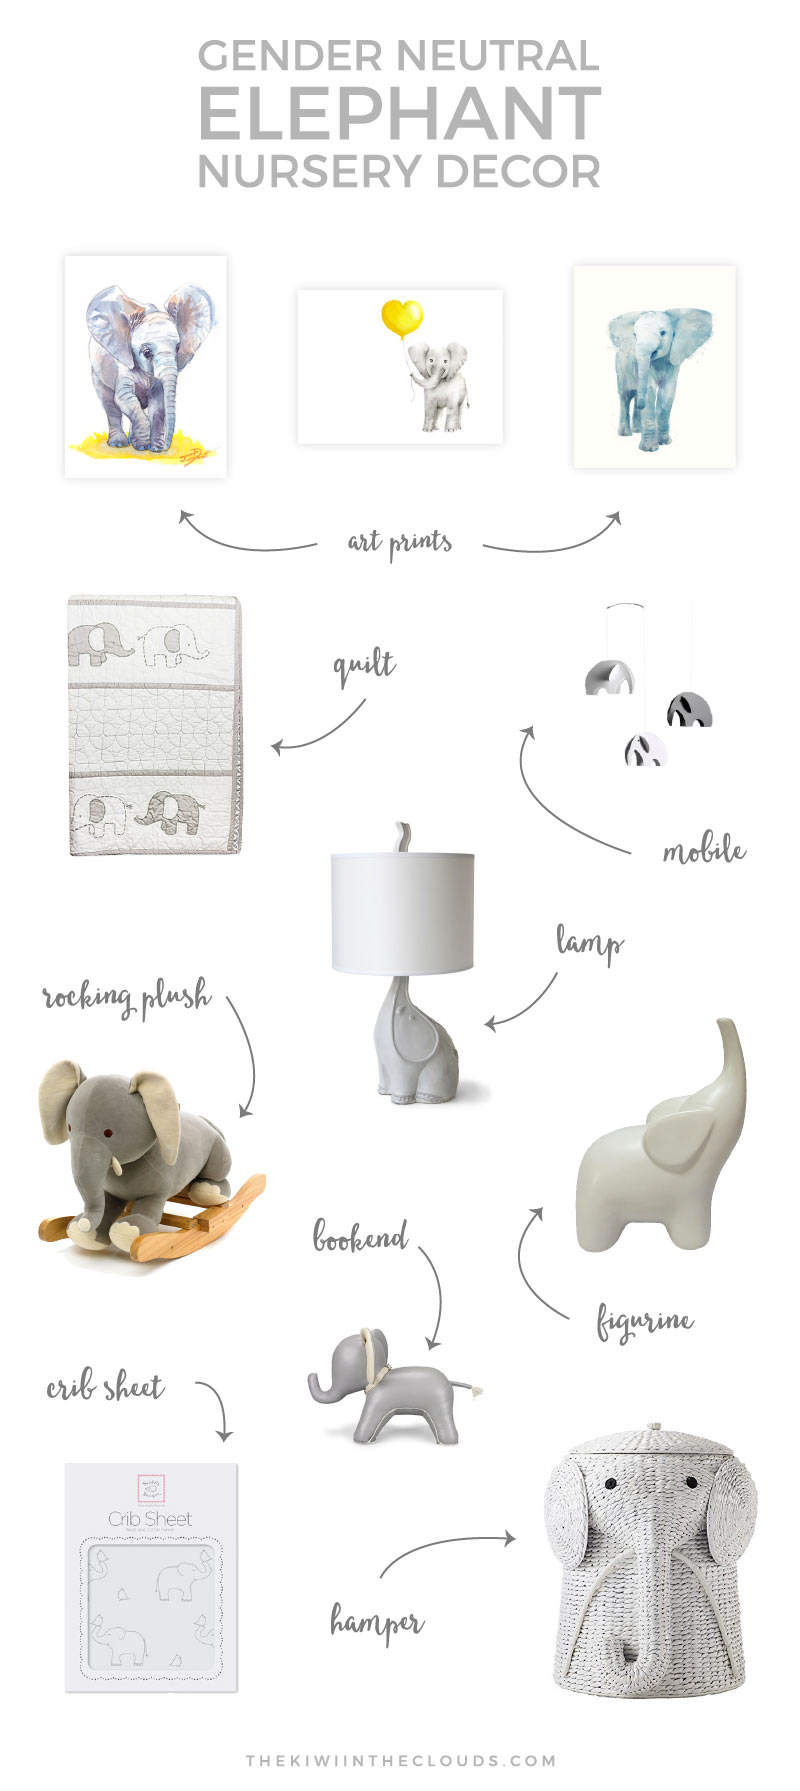 If you're planning a neutral elephant themed nursery for baby, then you'll want to check out this collection of the cutest elephant nursery decor items.